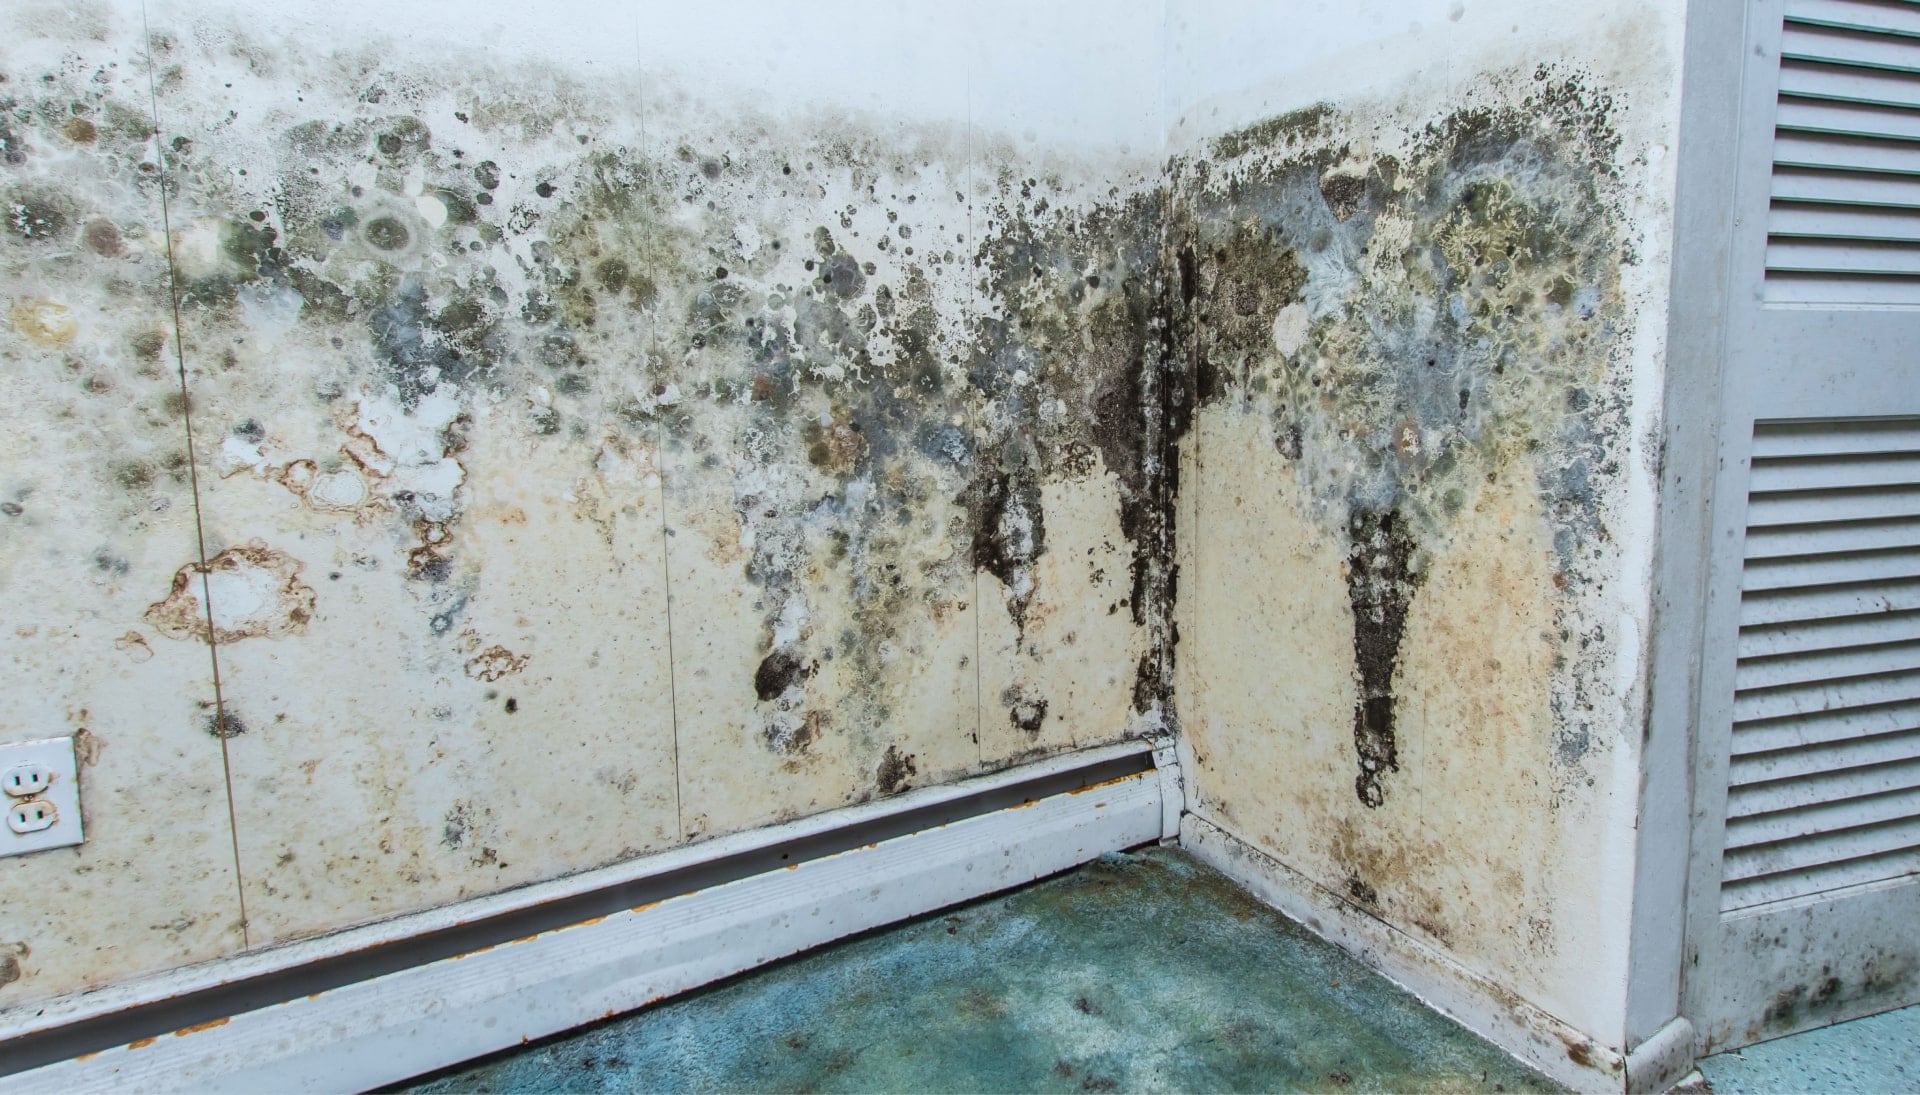 Professional mold removal, odor control, and water damage restoration service in Plano, Texas.